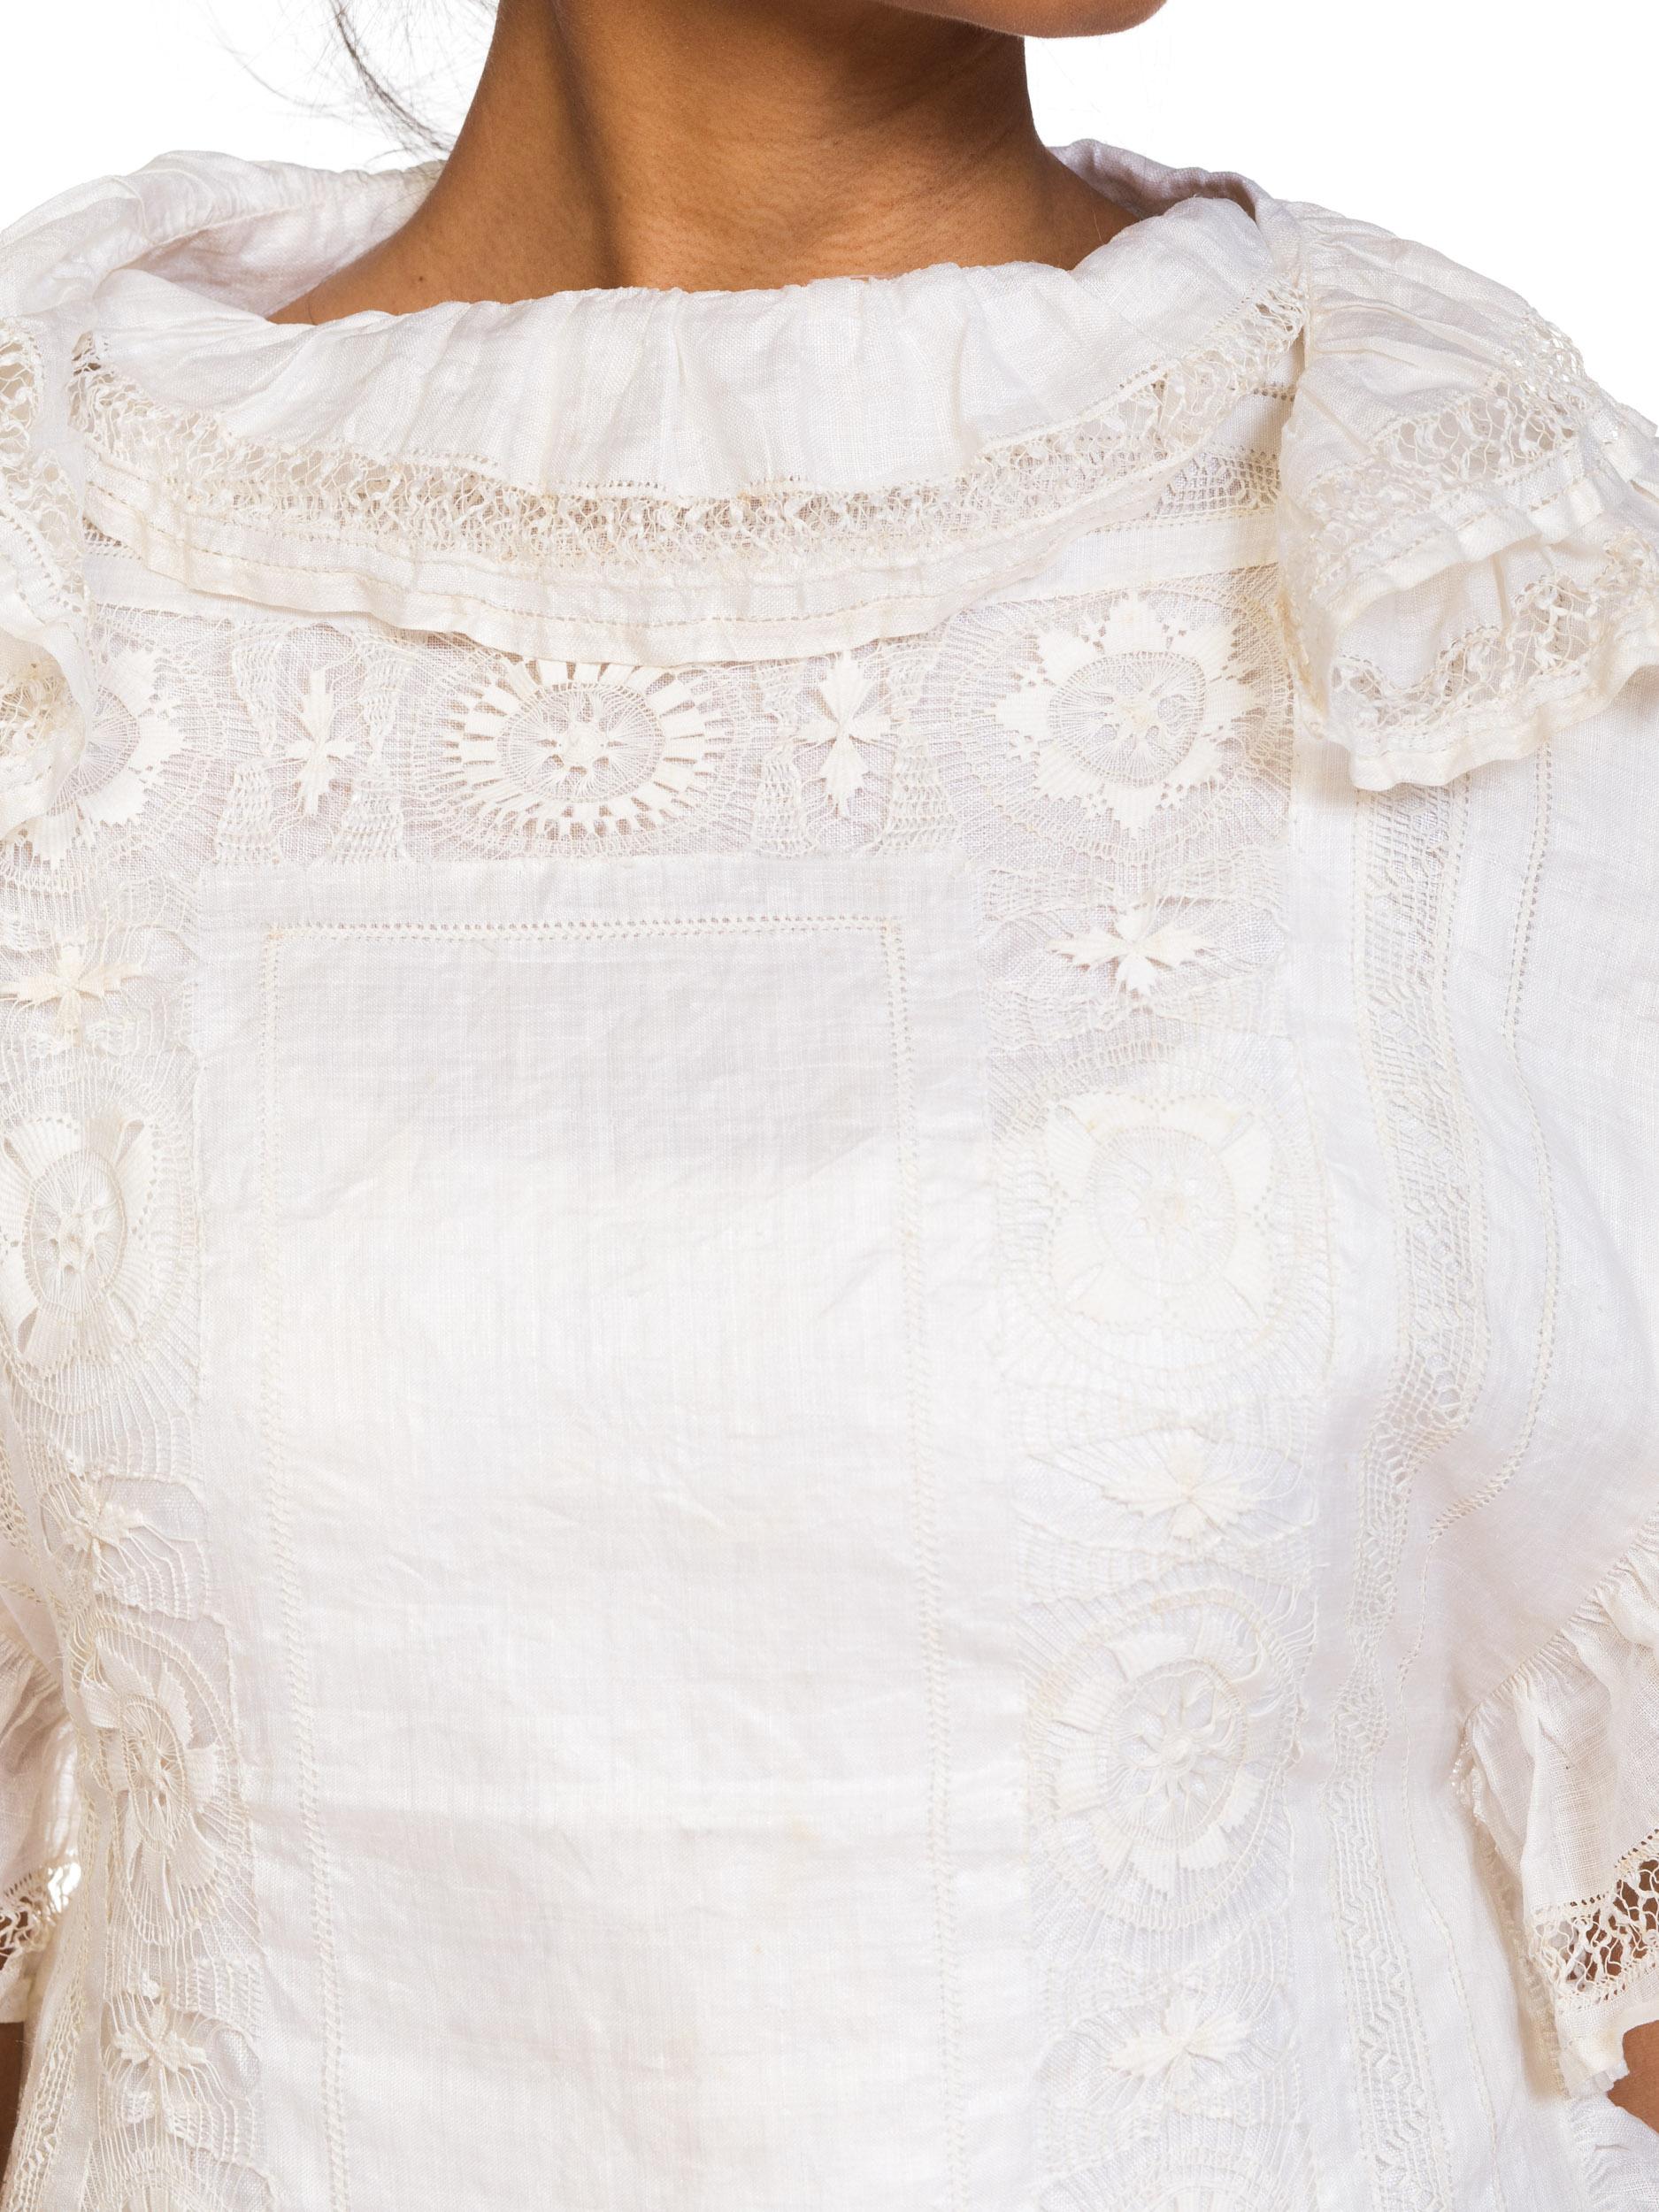 Handmade Lace & Linen Victorian Lace Top 6